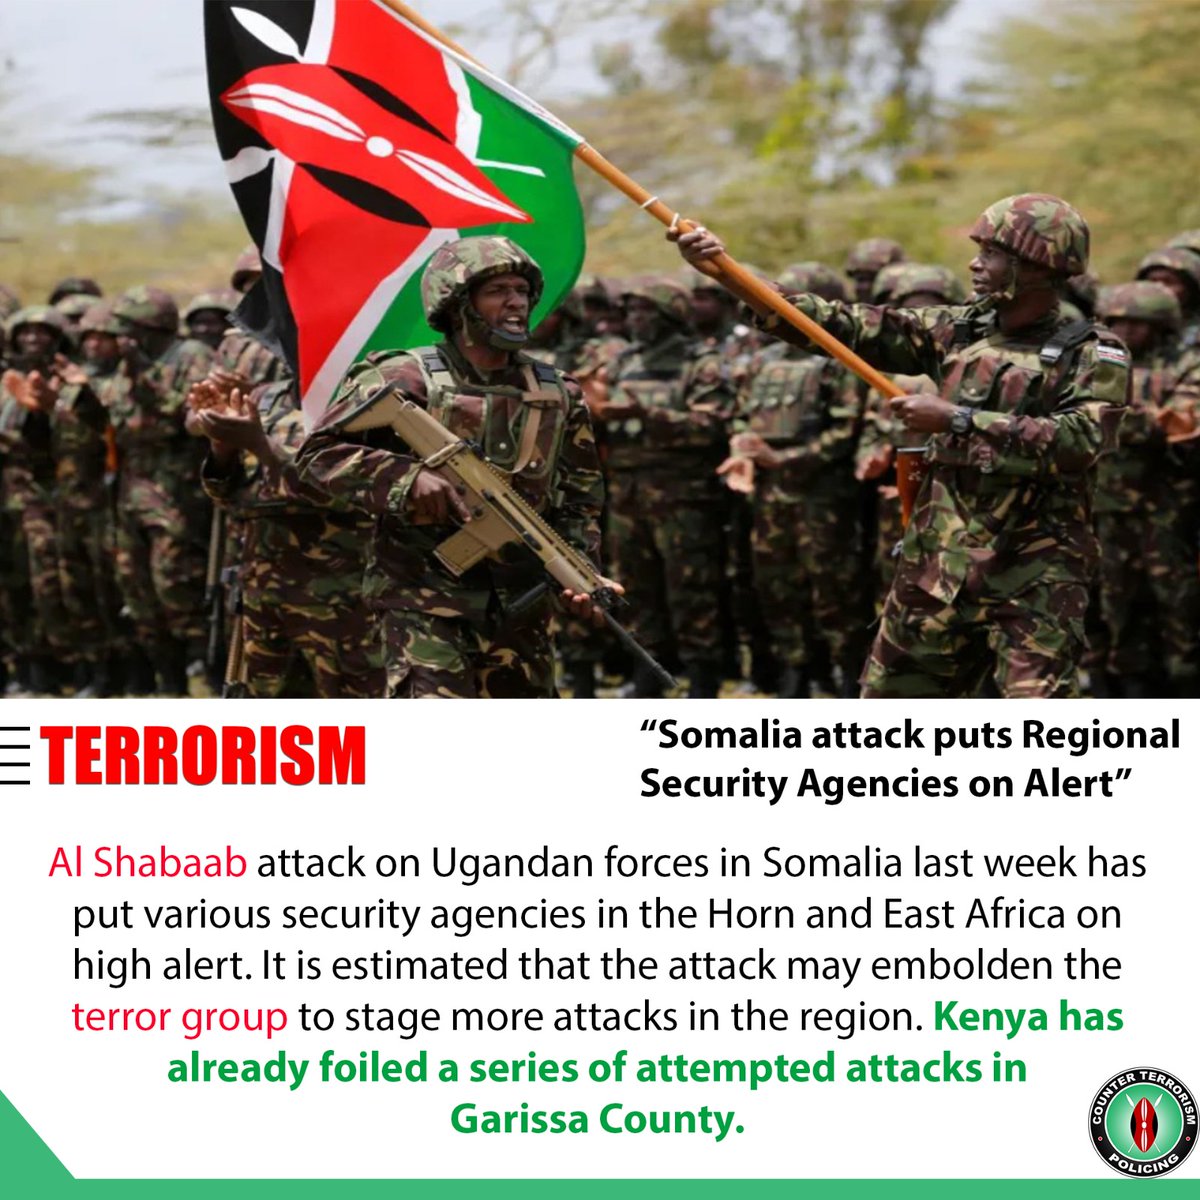 #Alshabaab is hellbent to carry out more attacks in the region to appear relevant after the group faced humiliating defeats by #Somalia Security Forces & other partners.

States need to continue partnering to fight terrorism & degrade AlShabaab.
#ActionCountersTerrorism 
@abduhar